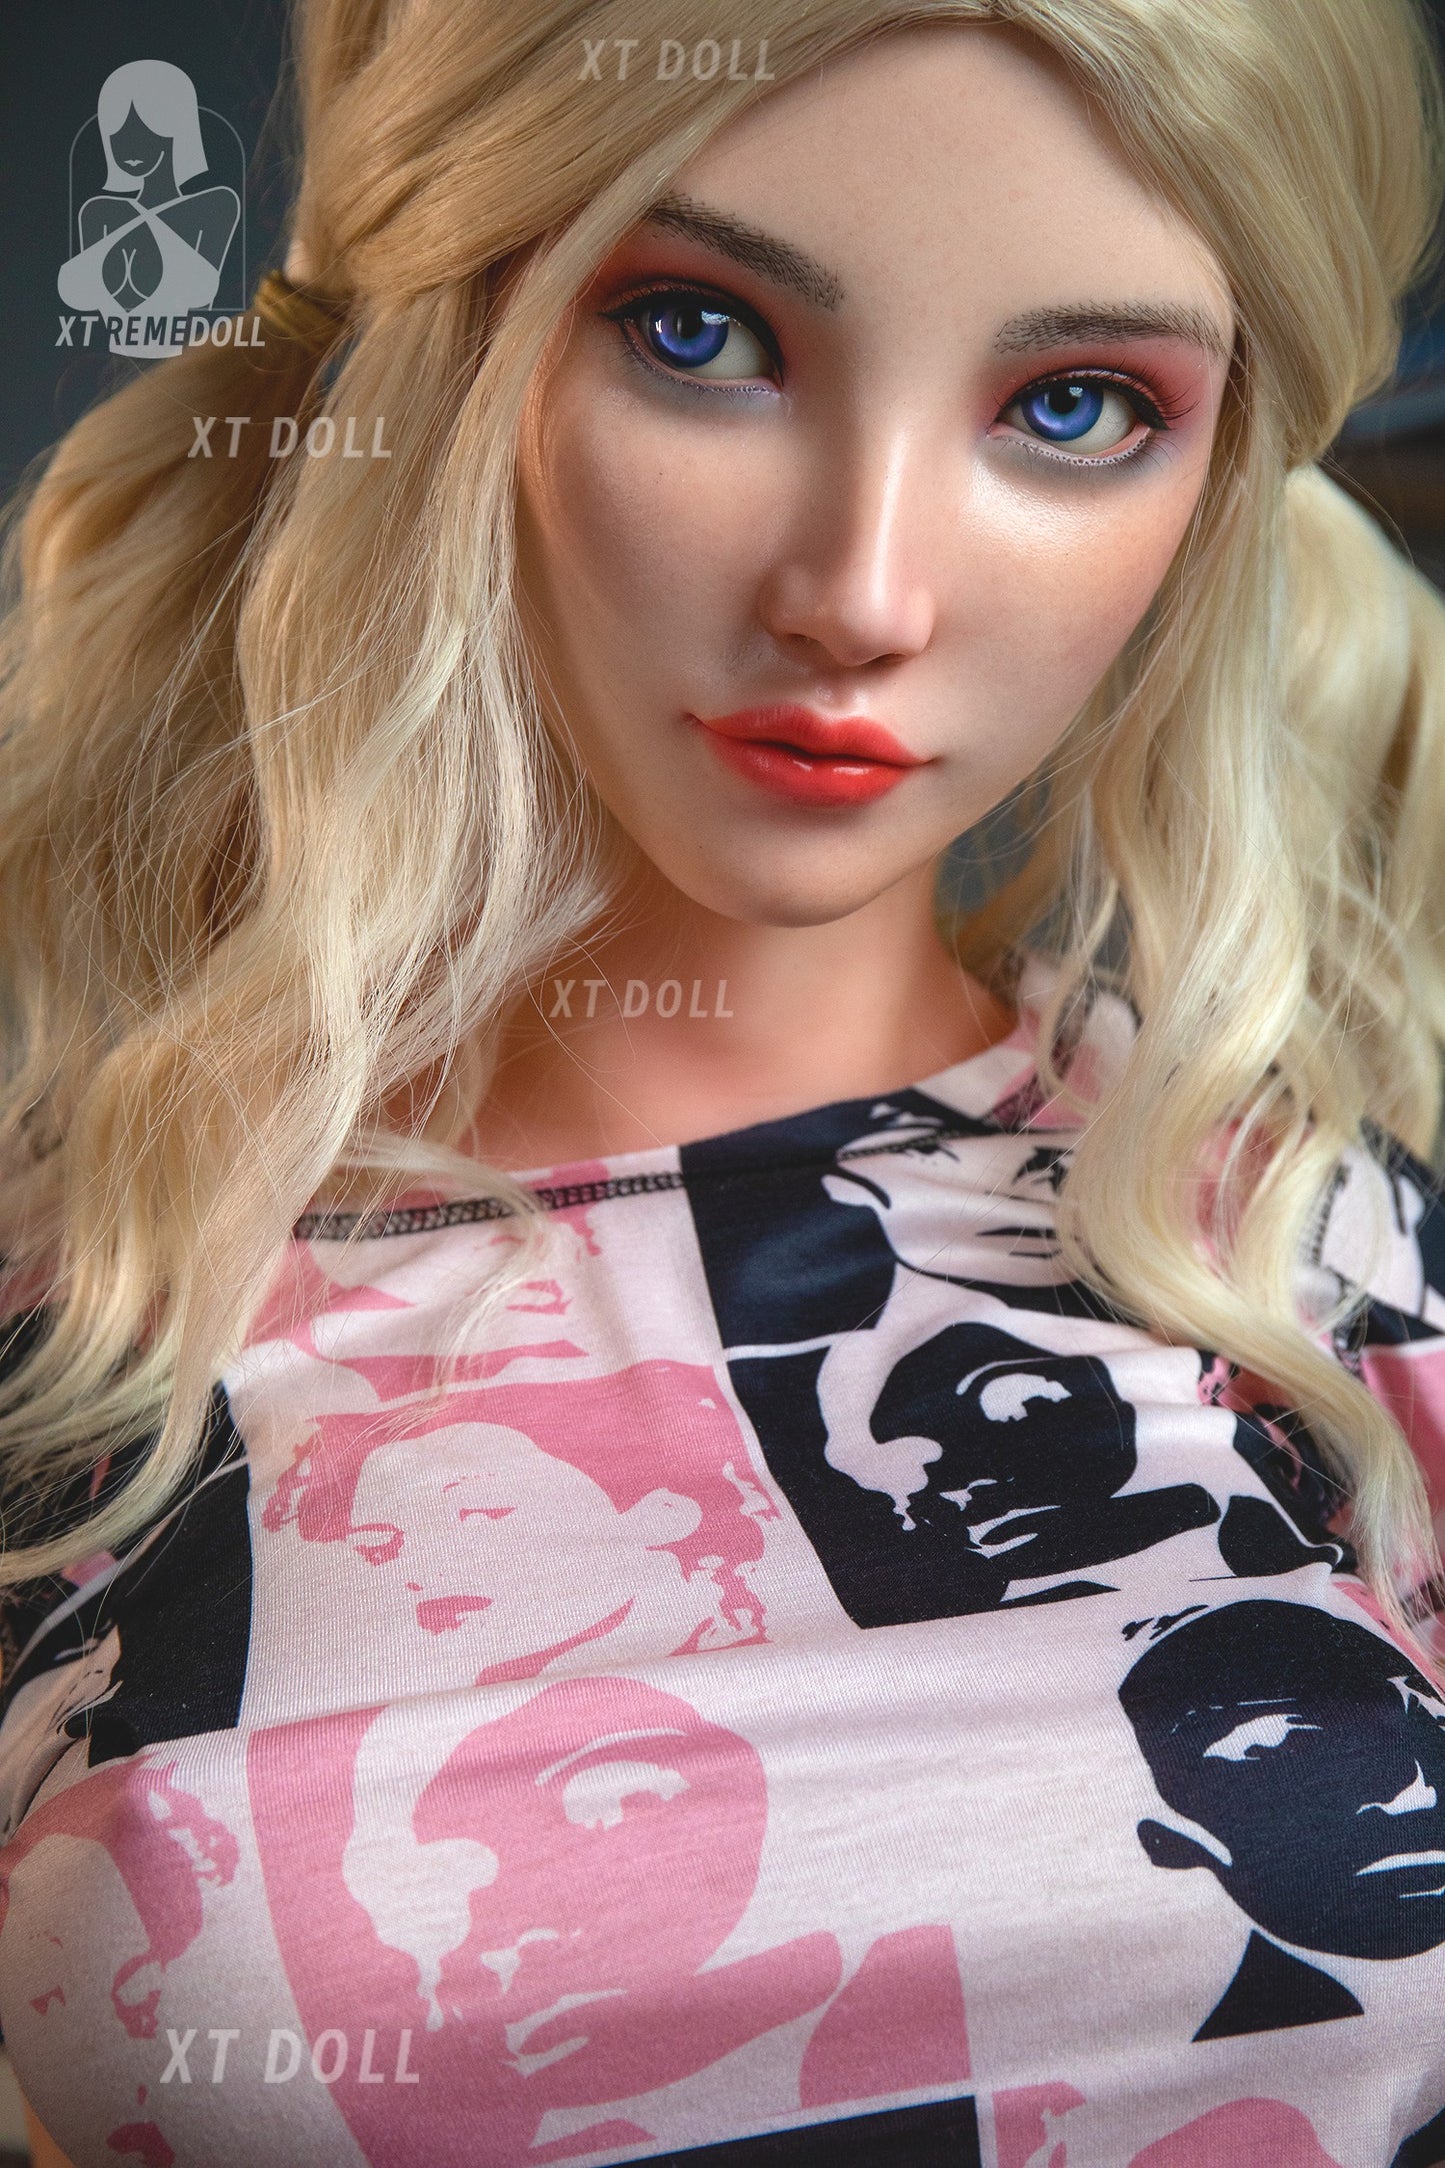 163CM C Cup XT Doll Silicone Head TPE Body Sex Doll Vicky